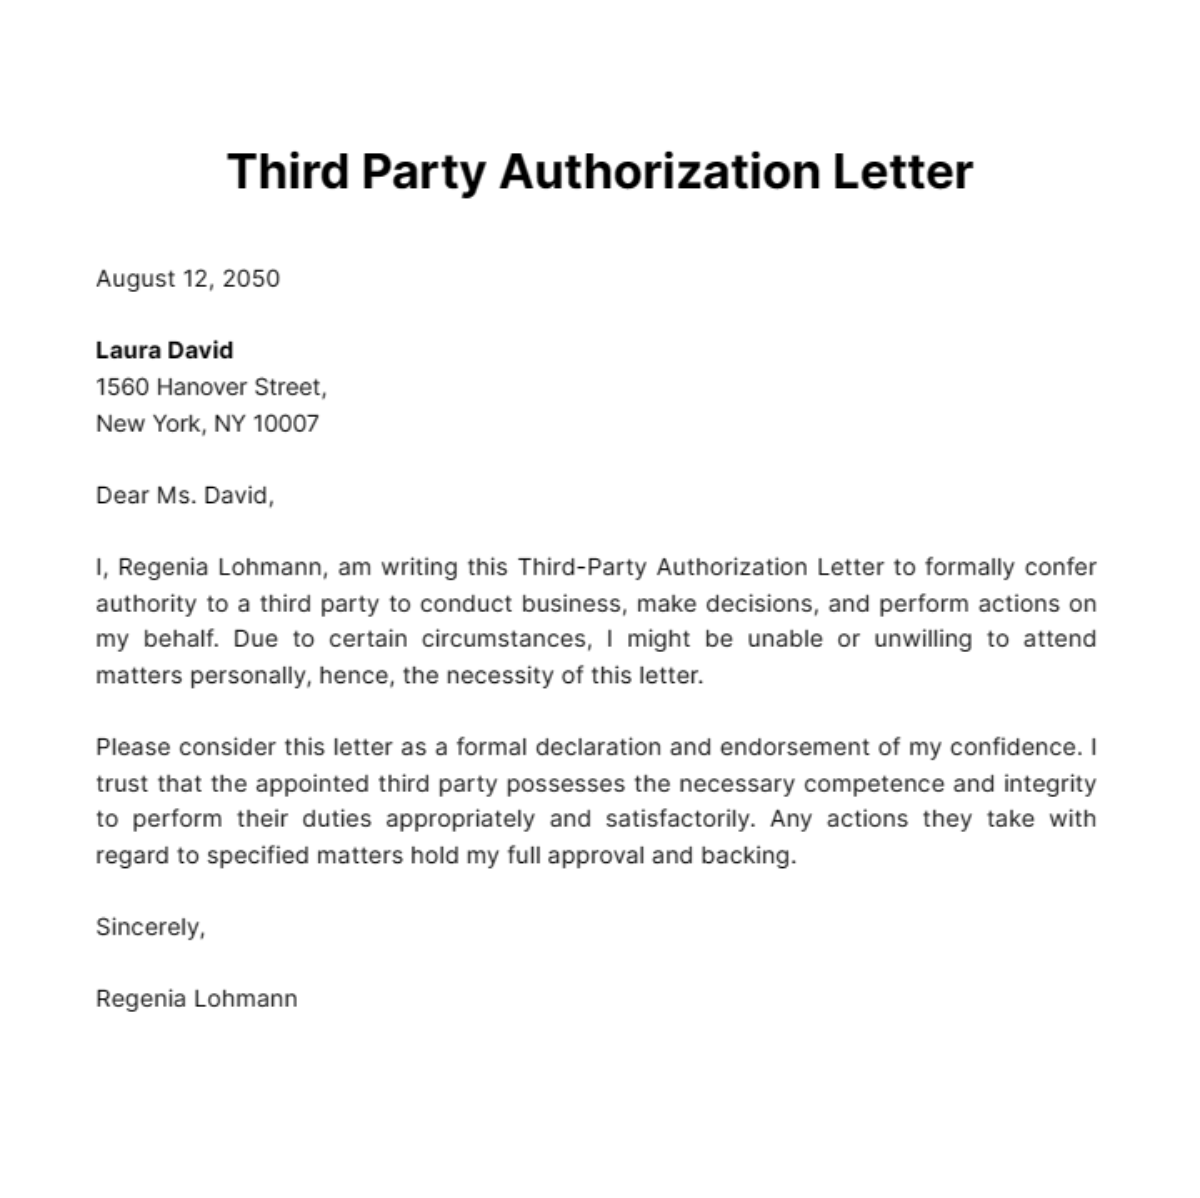 Third Party Authorization Letter Template